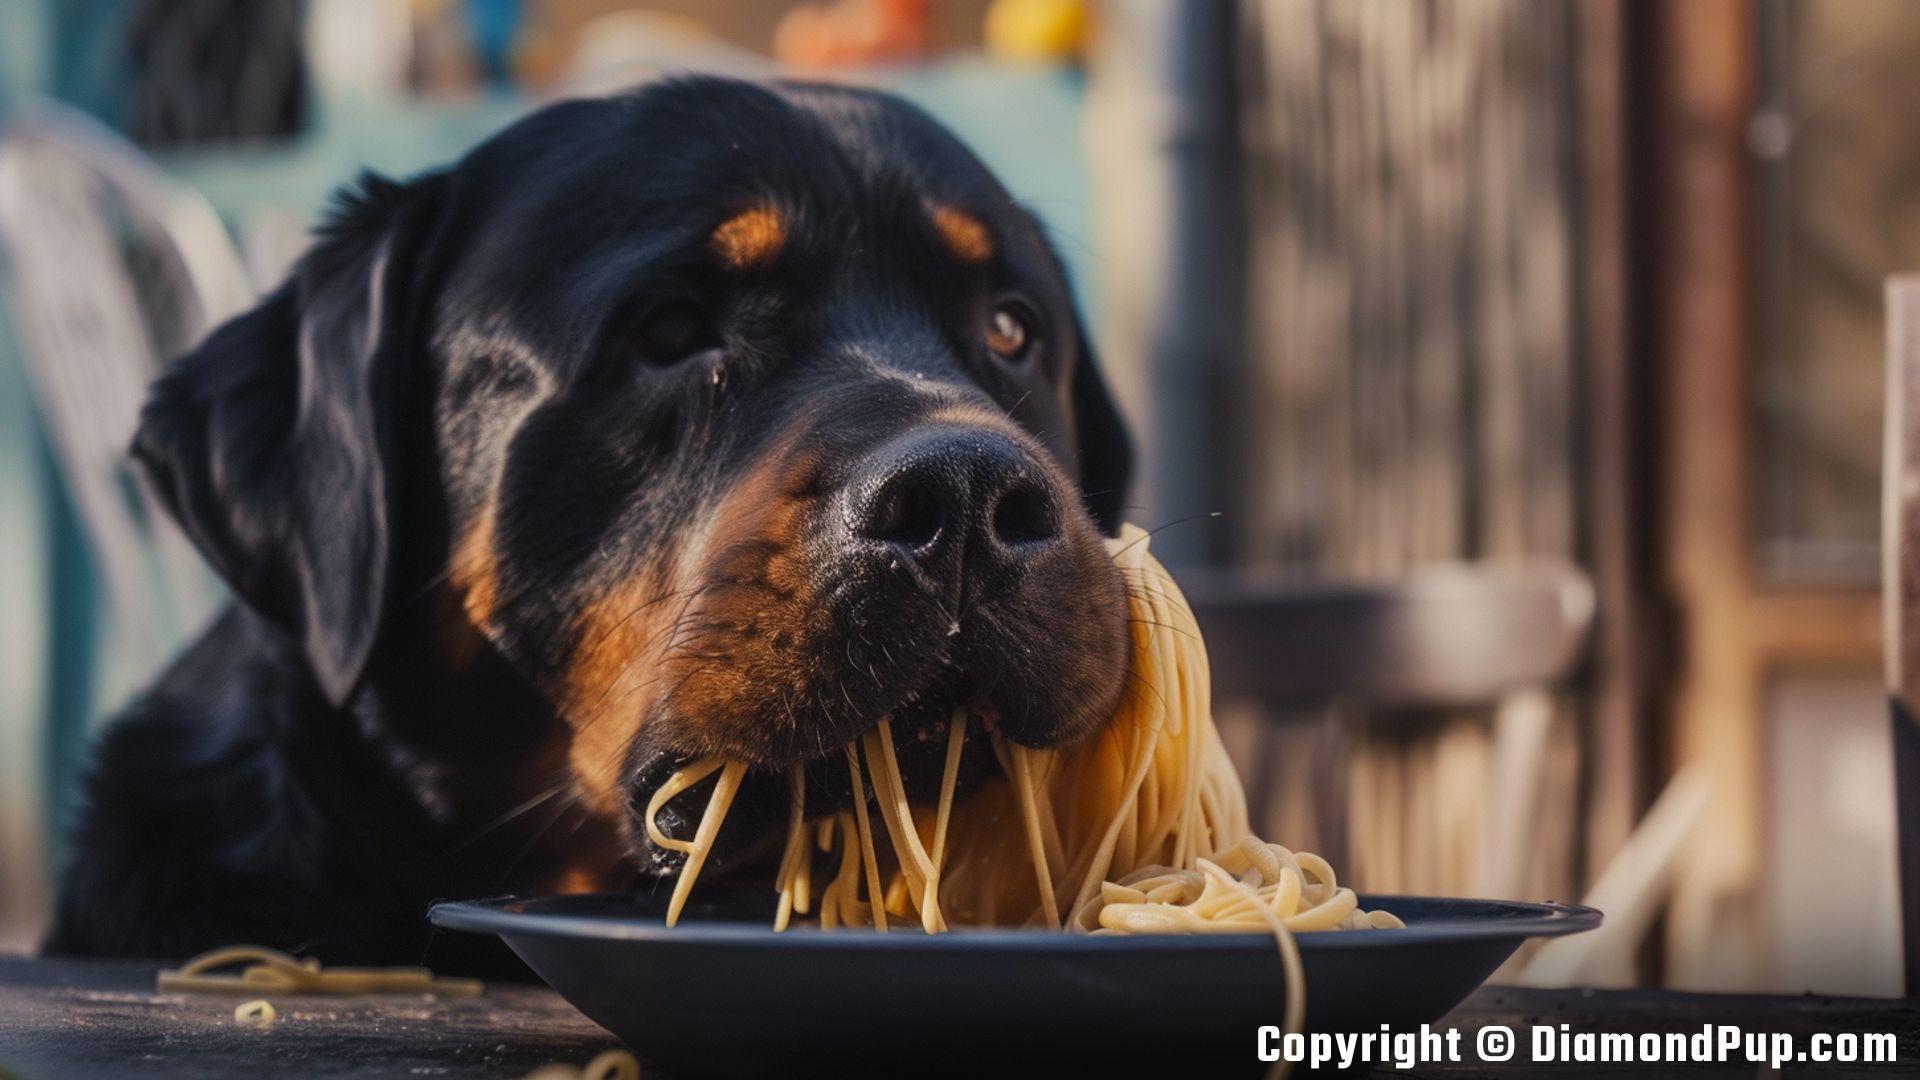 Photograph of a Cute Rottweiler Snacking on Pasta